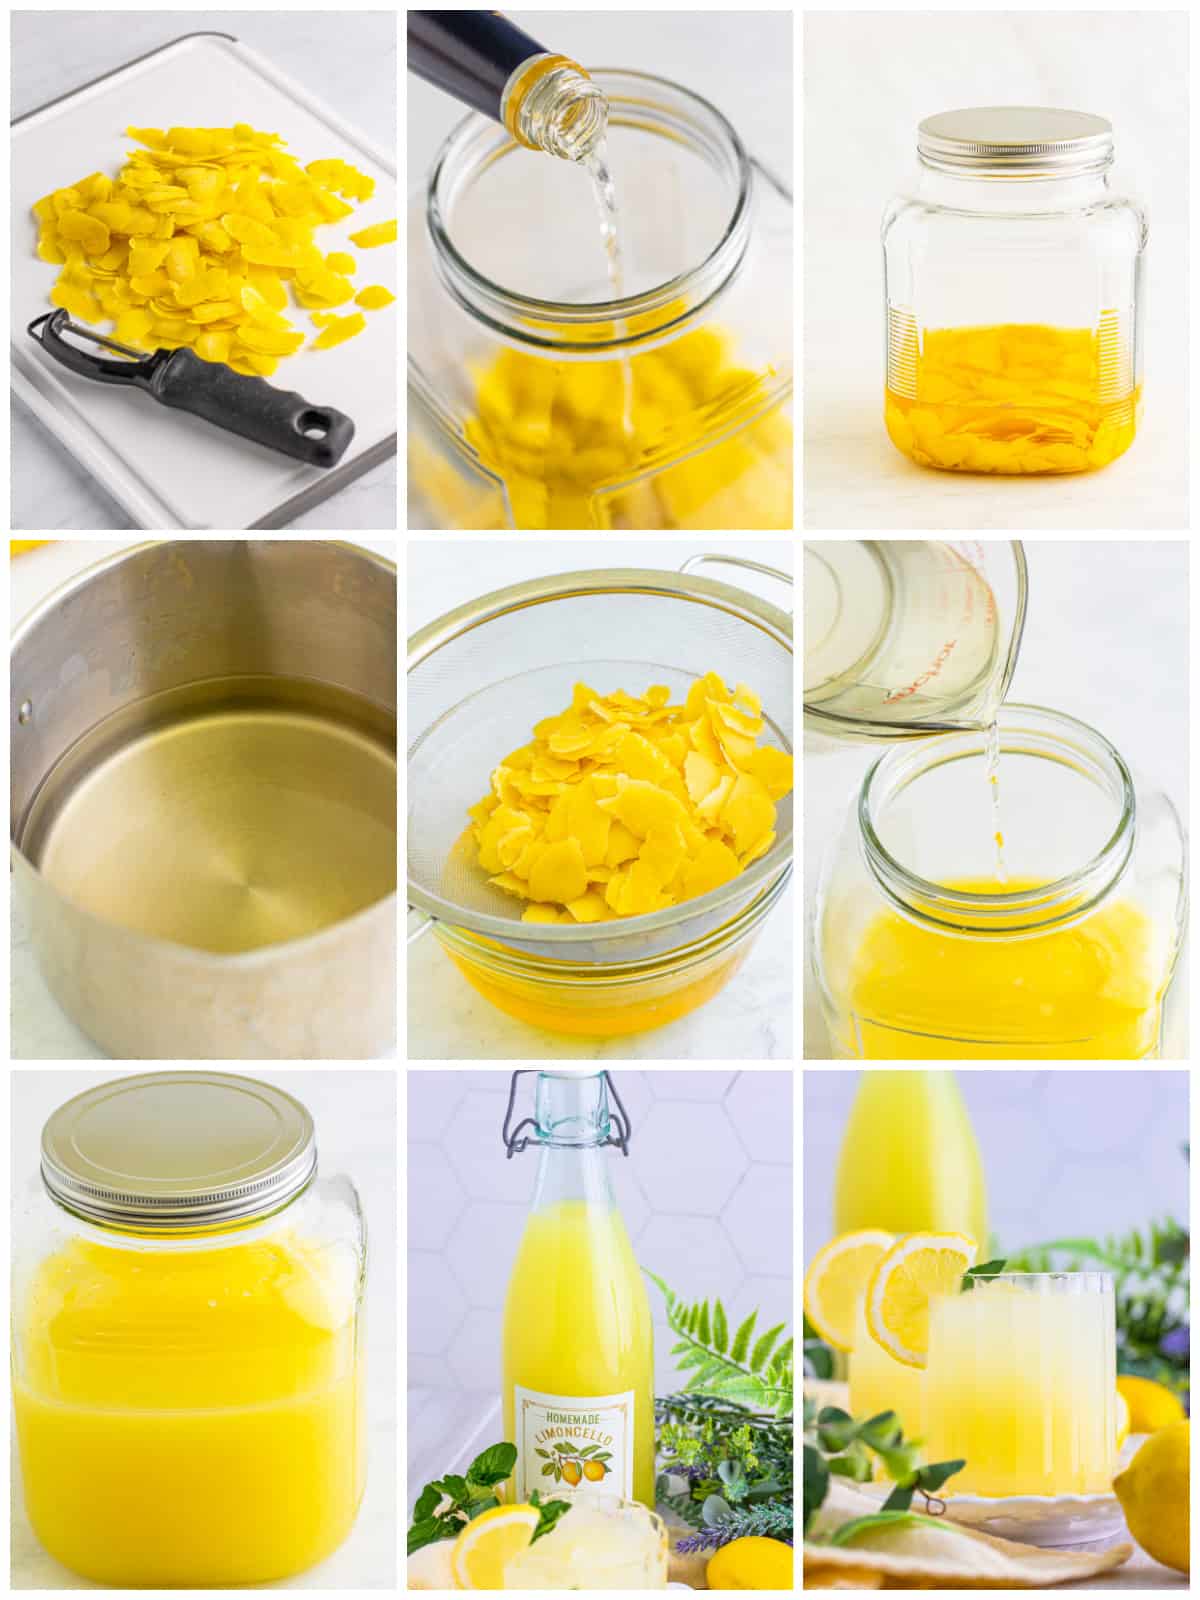 Step by step photos on how to make a Limoncello Recipe.